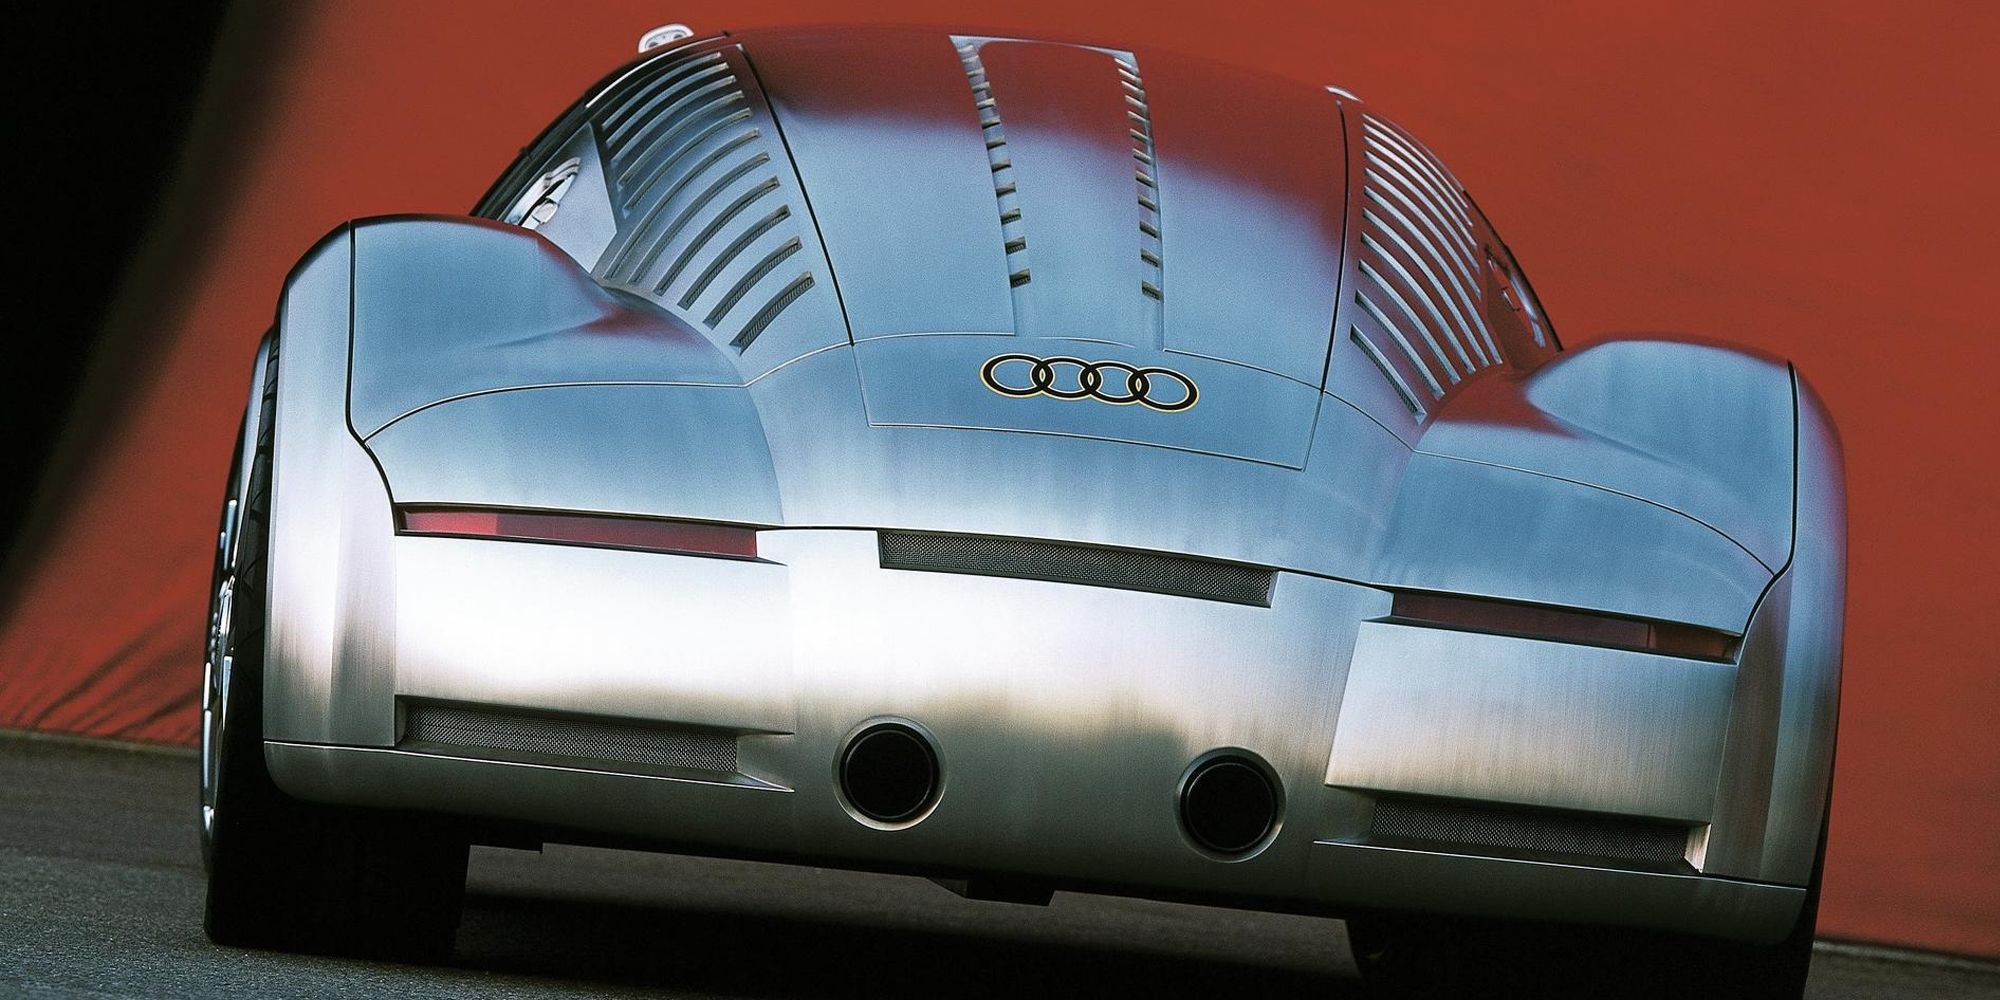 The front of the Audi Rosemeyer concept